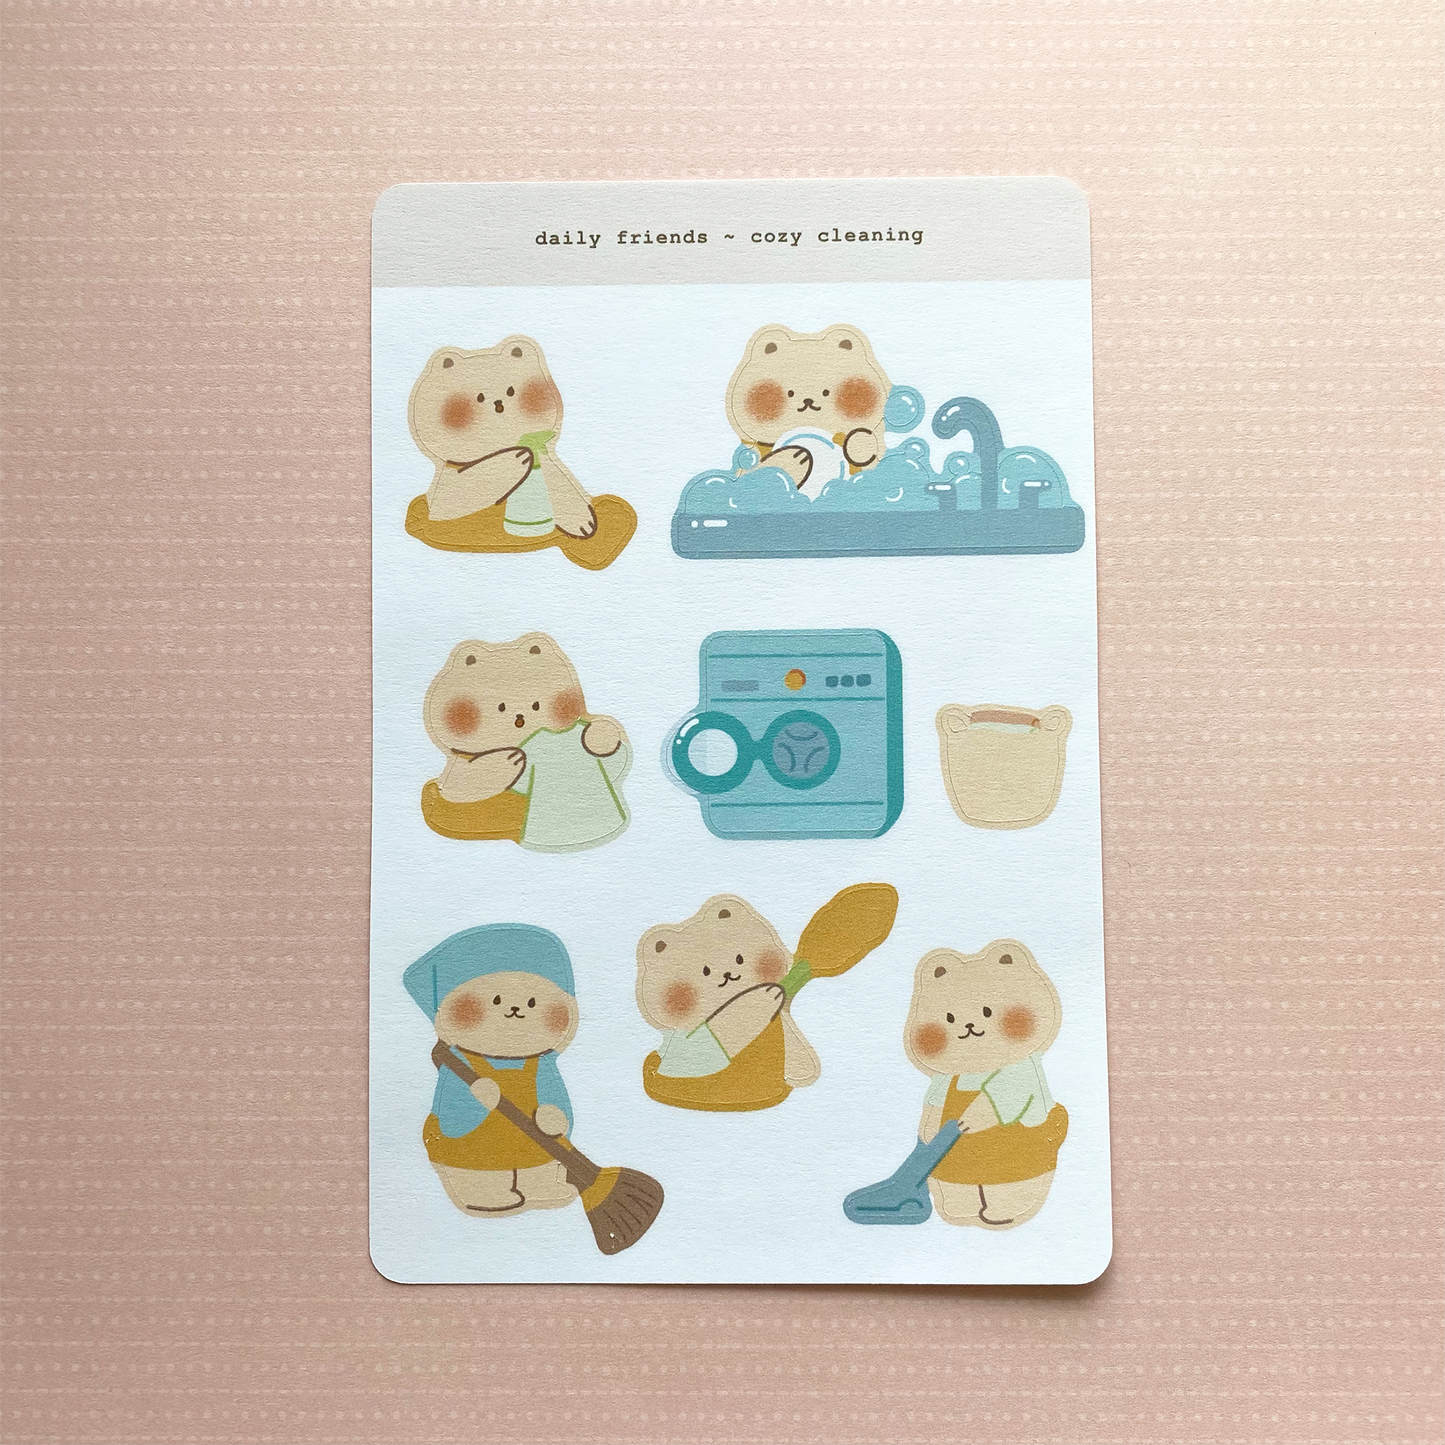 Cozy Cleaning Sticker Sheet